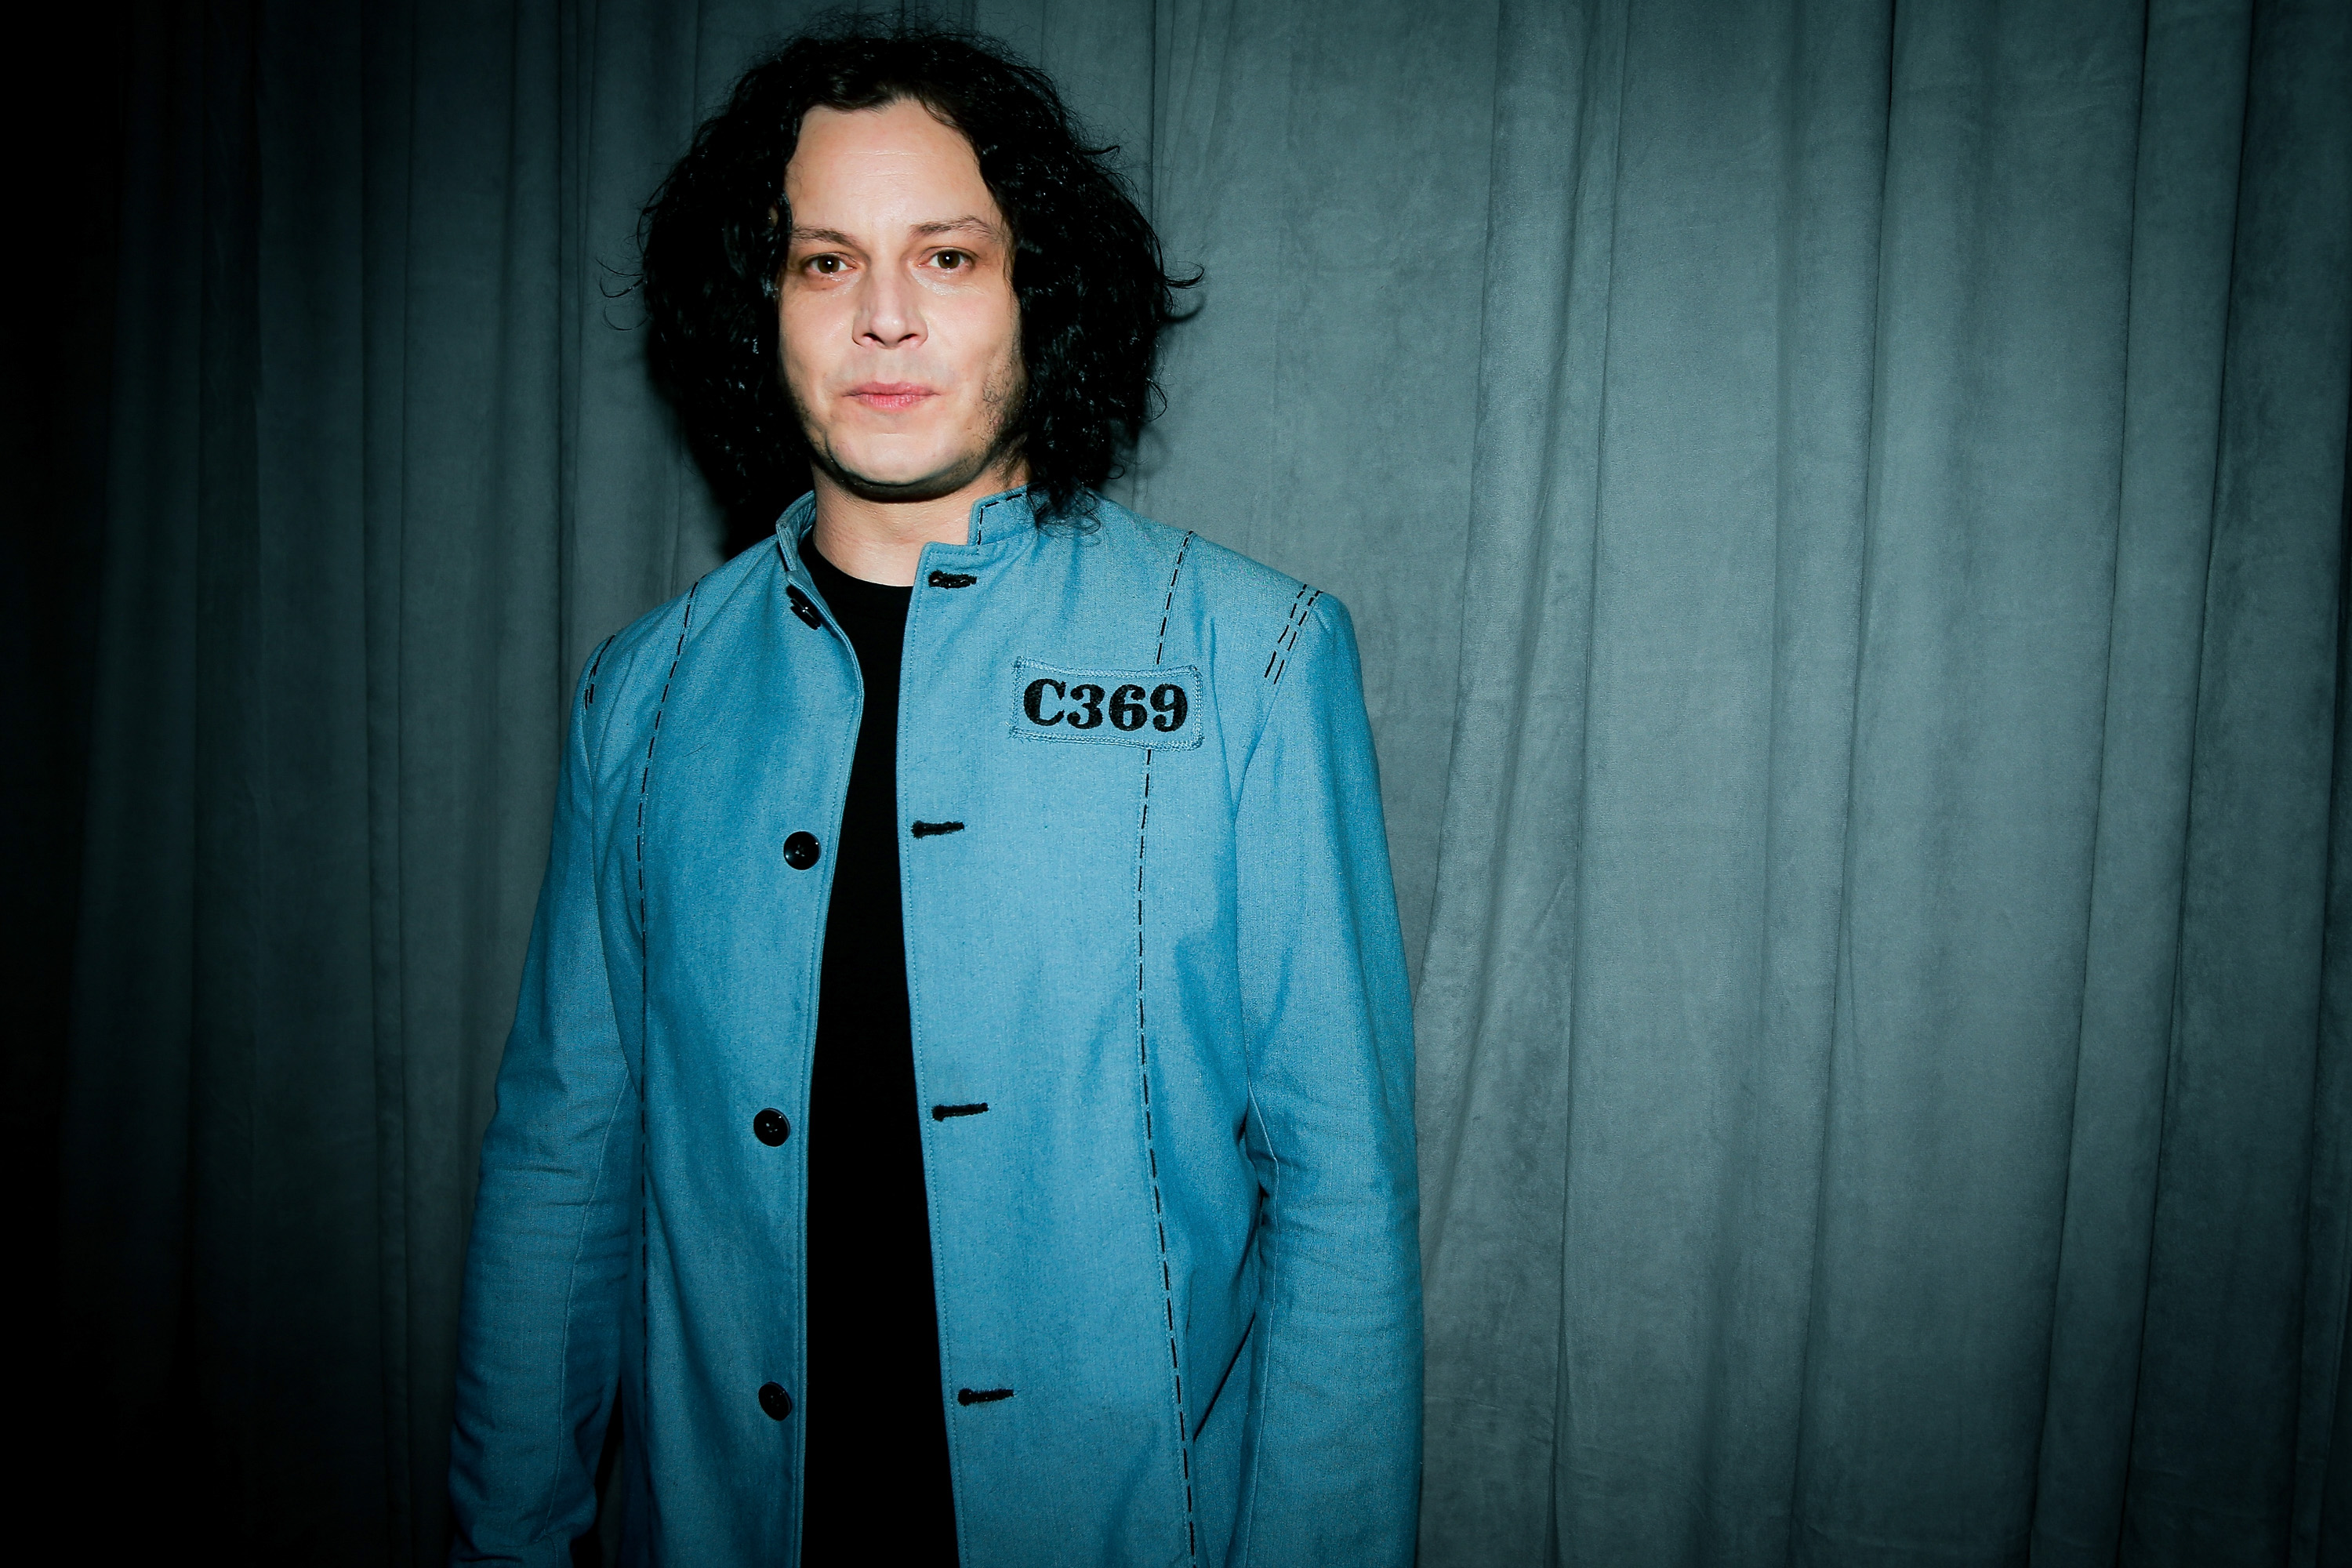 Jack White wears a black shirt and light blue jacket against a blue curtain background. 